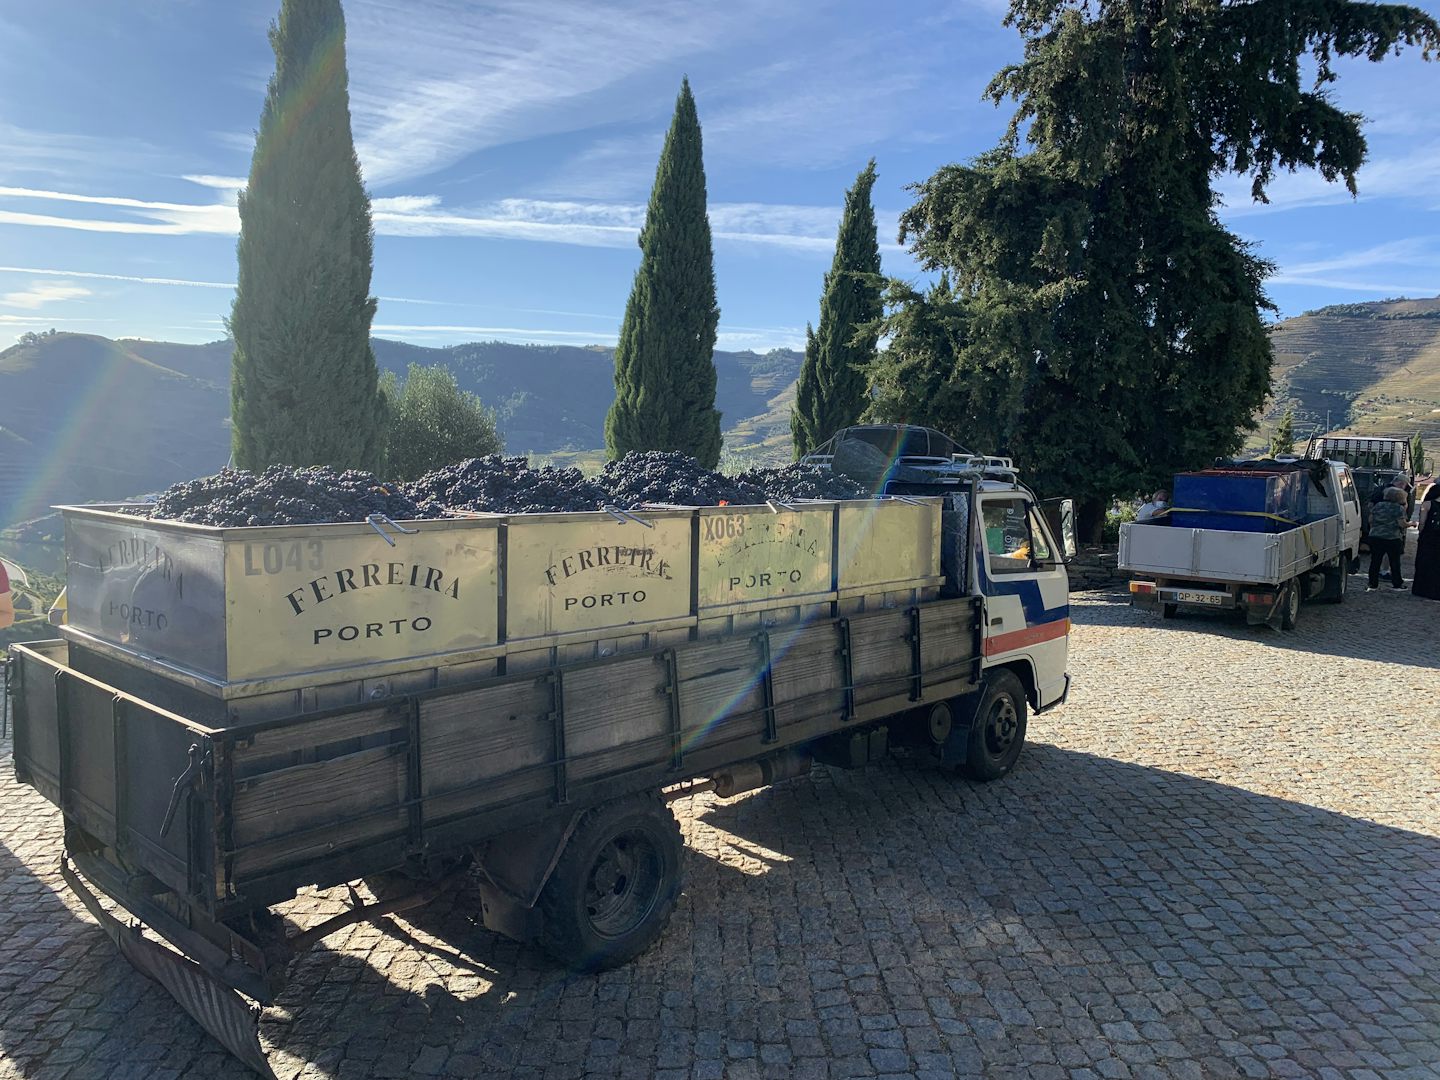 A visit to a port wine facility.  Small vineyard owners truck their produce from far and wide.